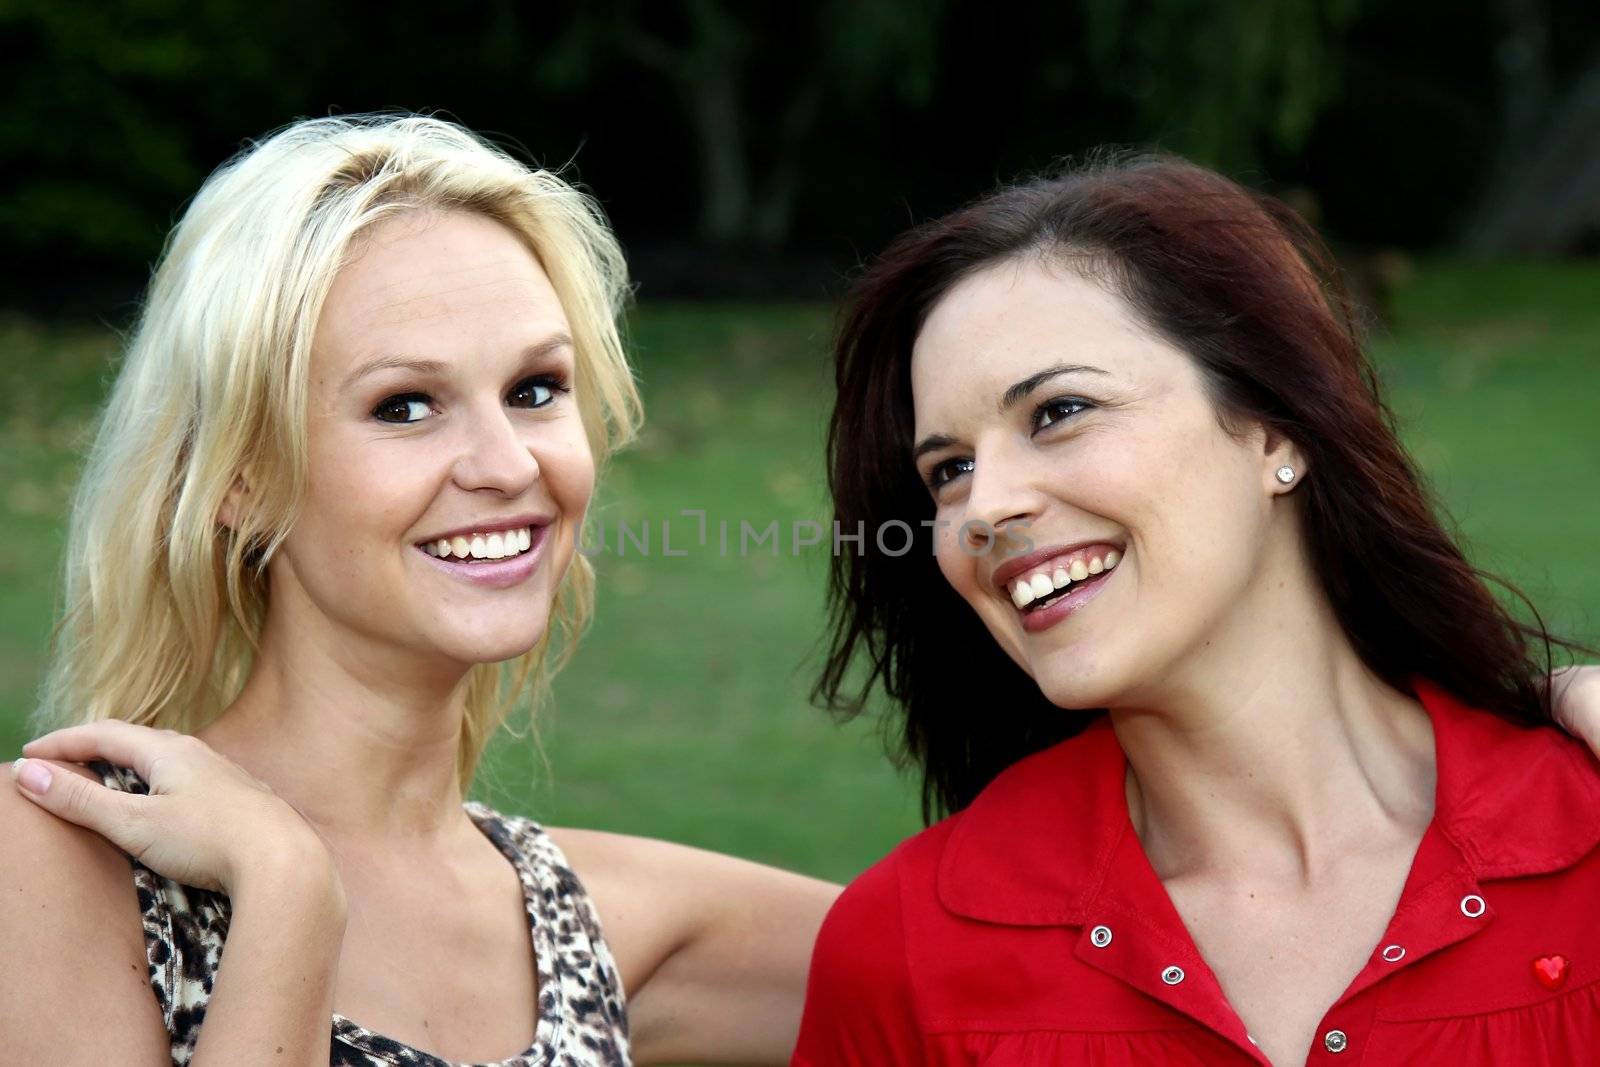 Two gorgeous smiling young women friends chatting together